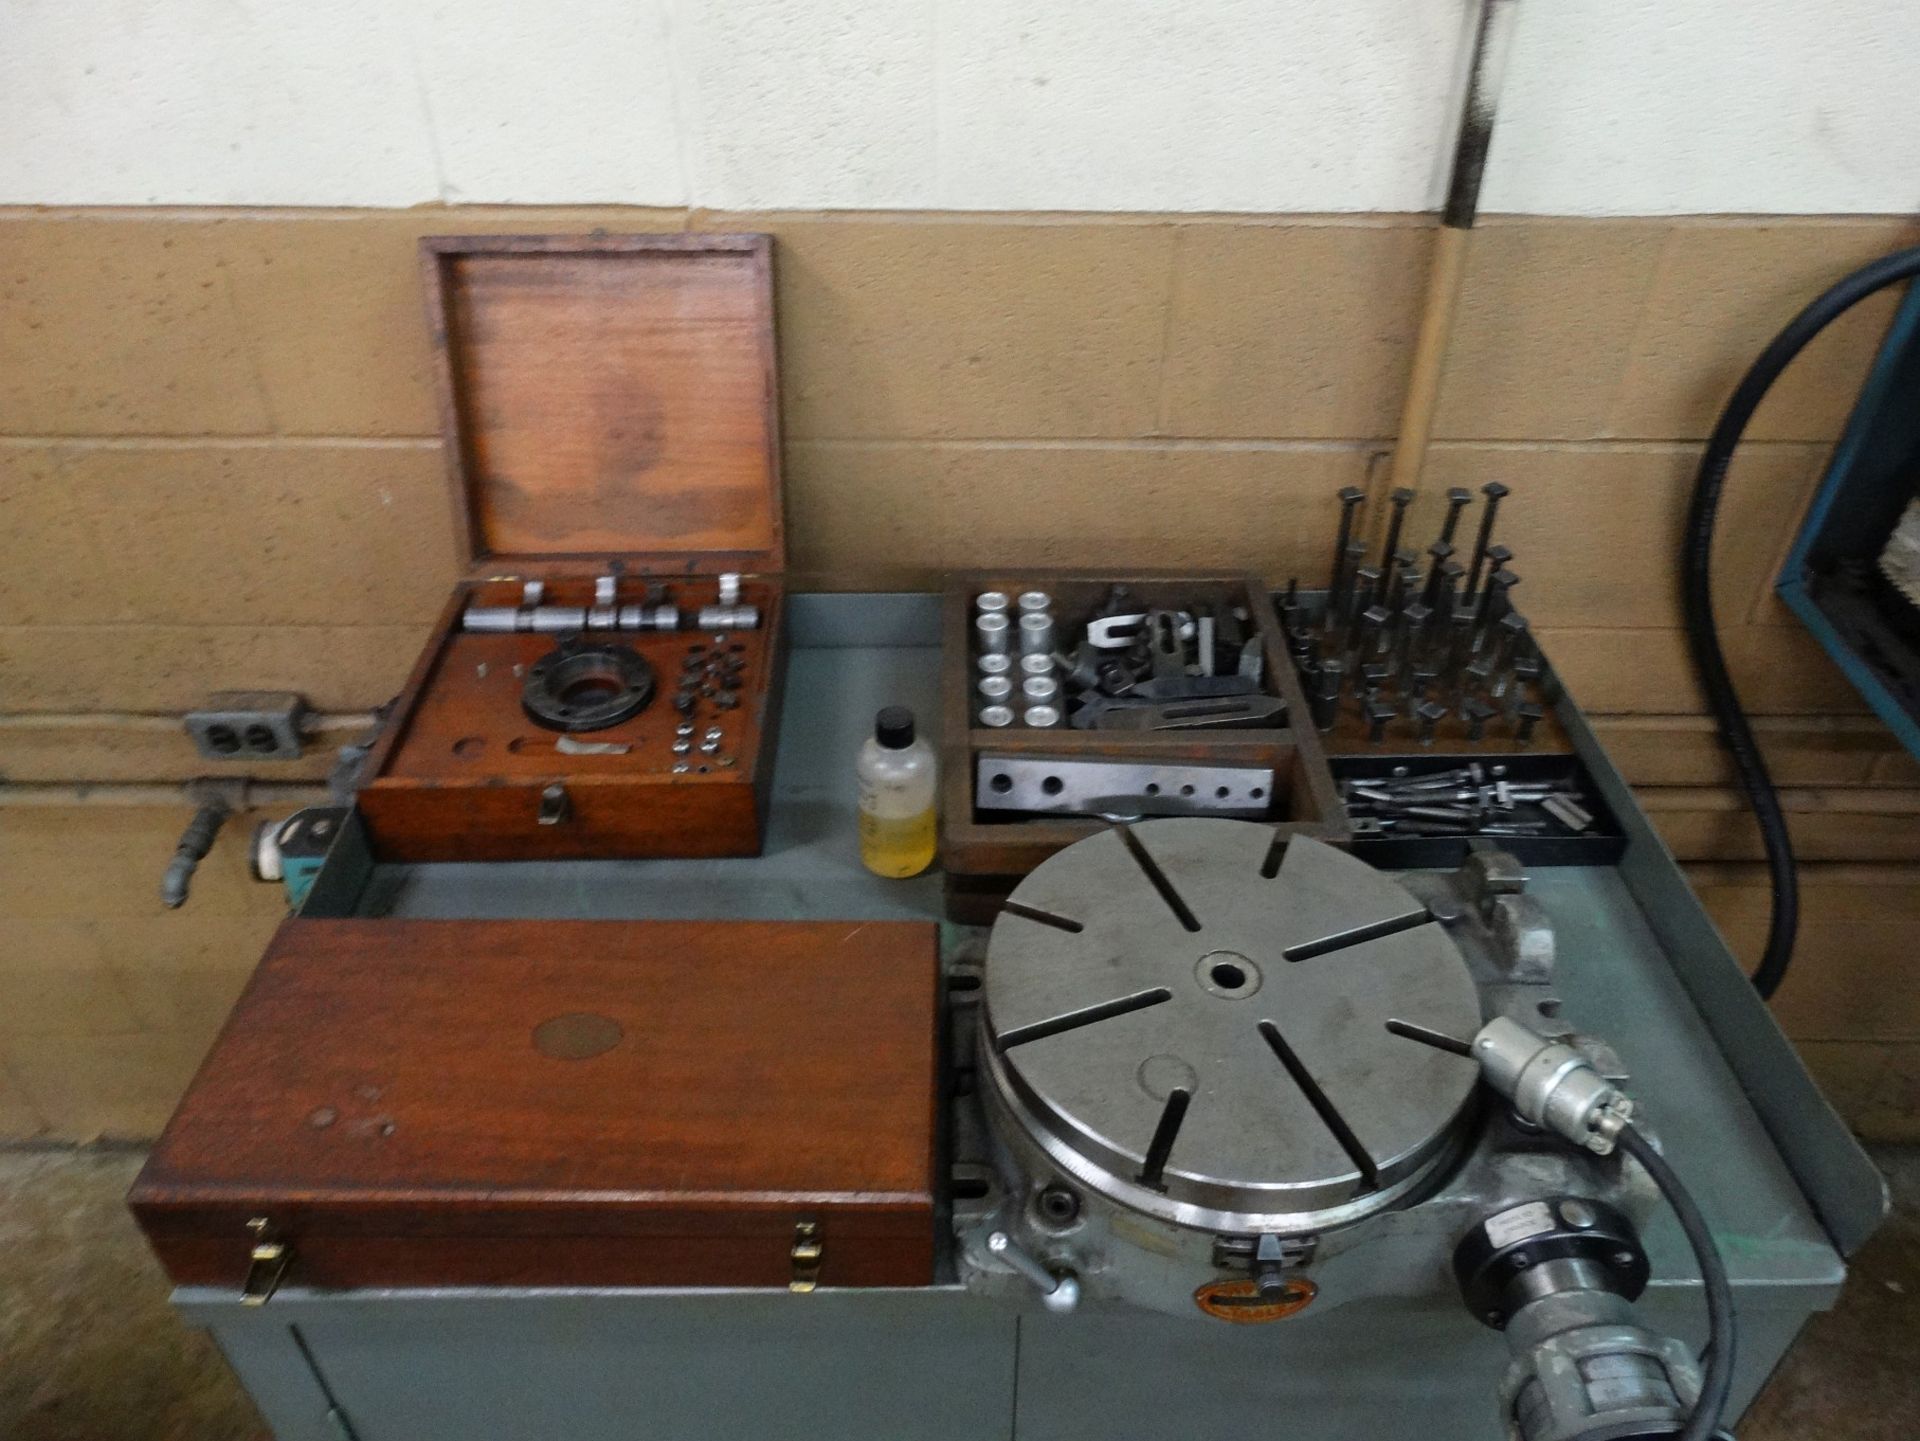 Moore Jig Grinder, Mdl G18 (No. 3), 11" x 24" Tab 11" x 18" Travel, 13.5" Spindle to Column, 2"- - Image 3 of 6